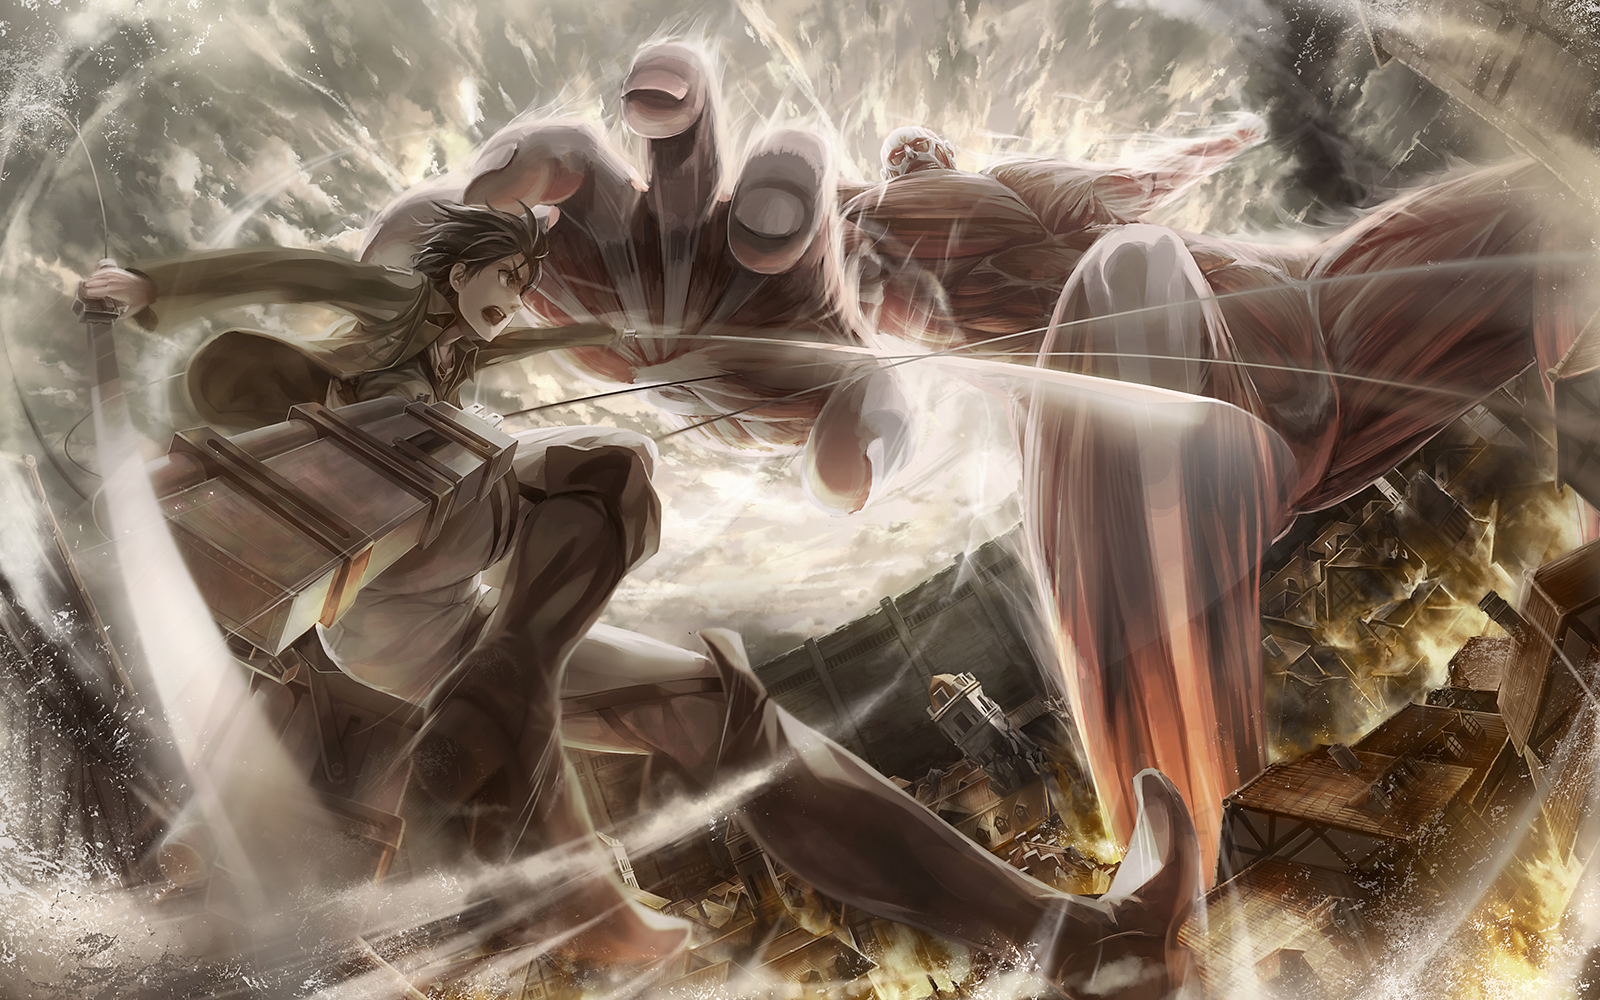 Download Wallpaper From Anime Attack On Titan With - Attack On Titan Wallpaper Epic , HD Wallpaper & Backgrounds